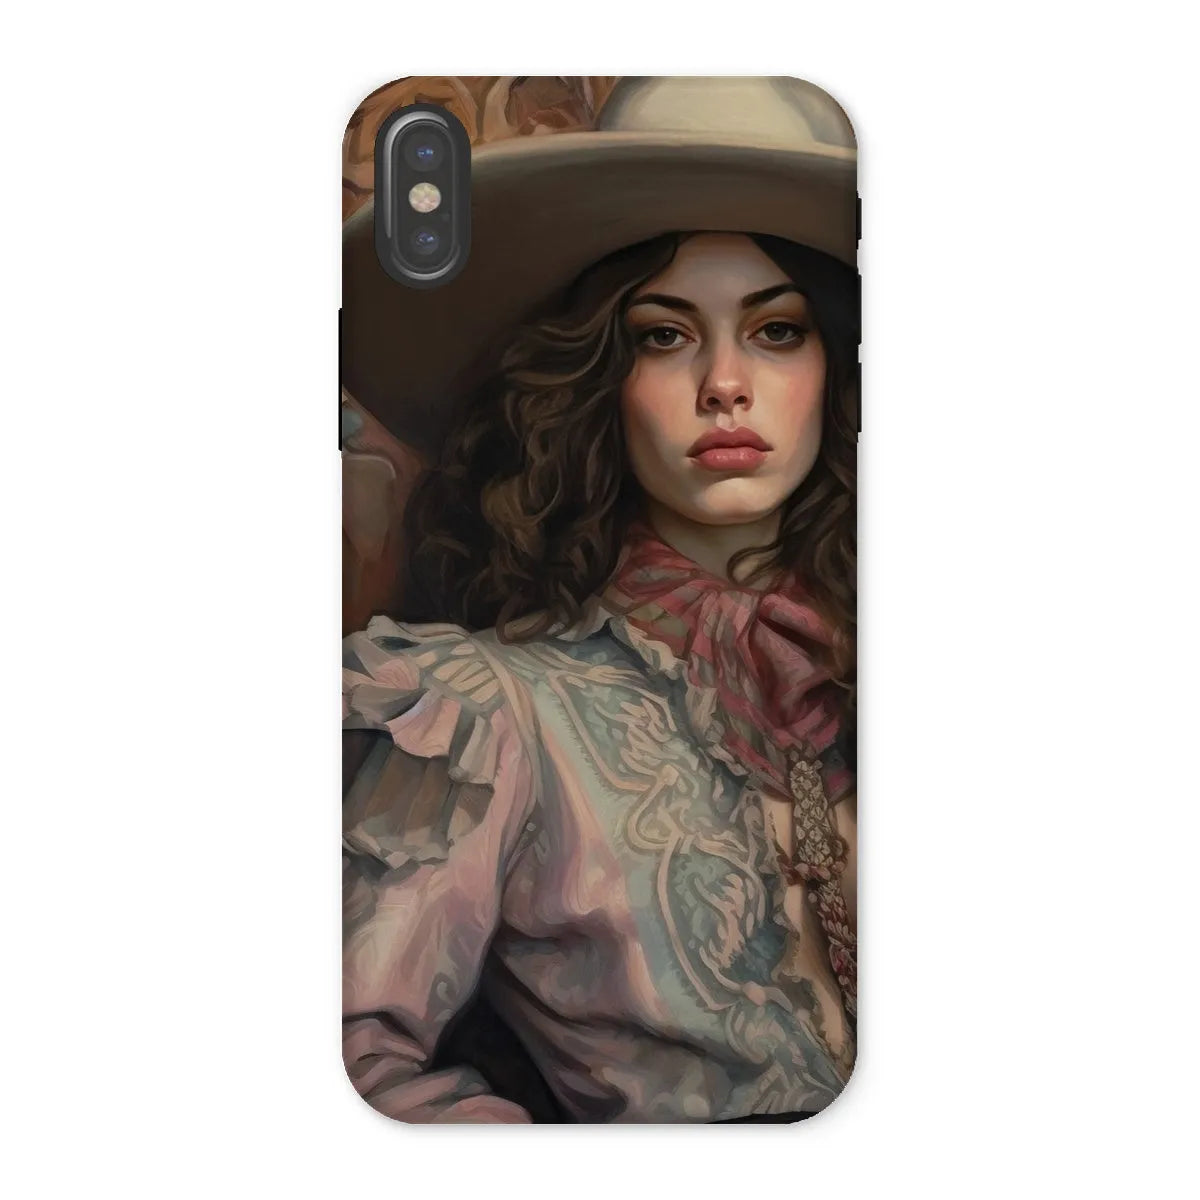 Alex The Lesbian Cowgirl - Sapphic Art Phone Case - Iphone x / Matte - Mobile Phone Cases - Aesthetic Art